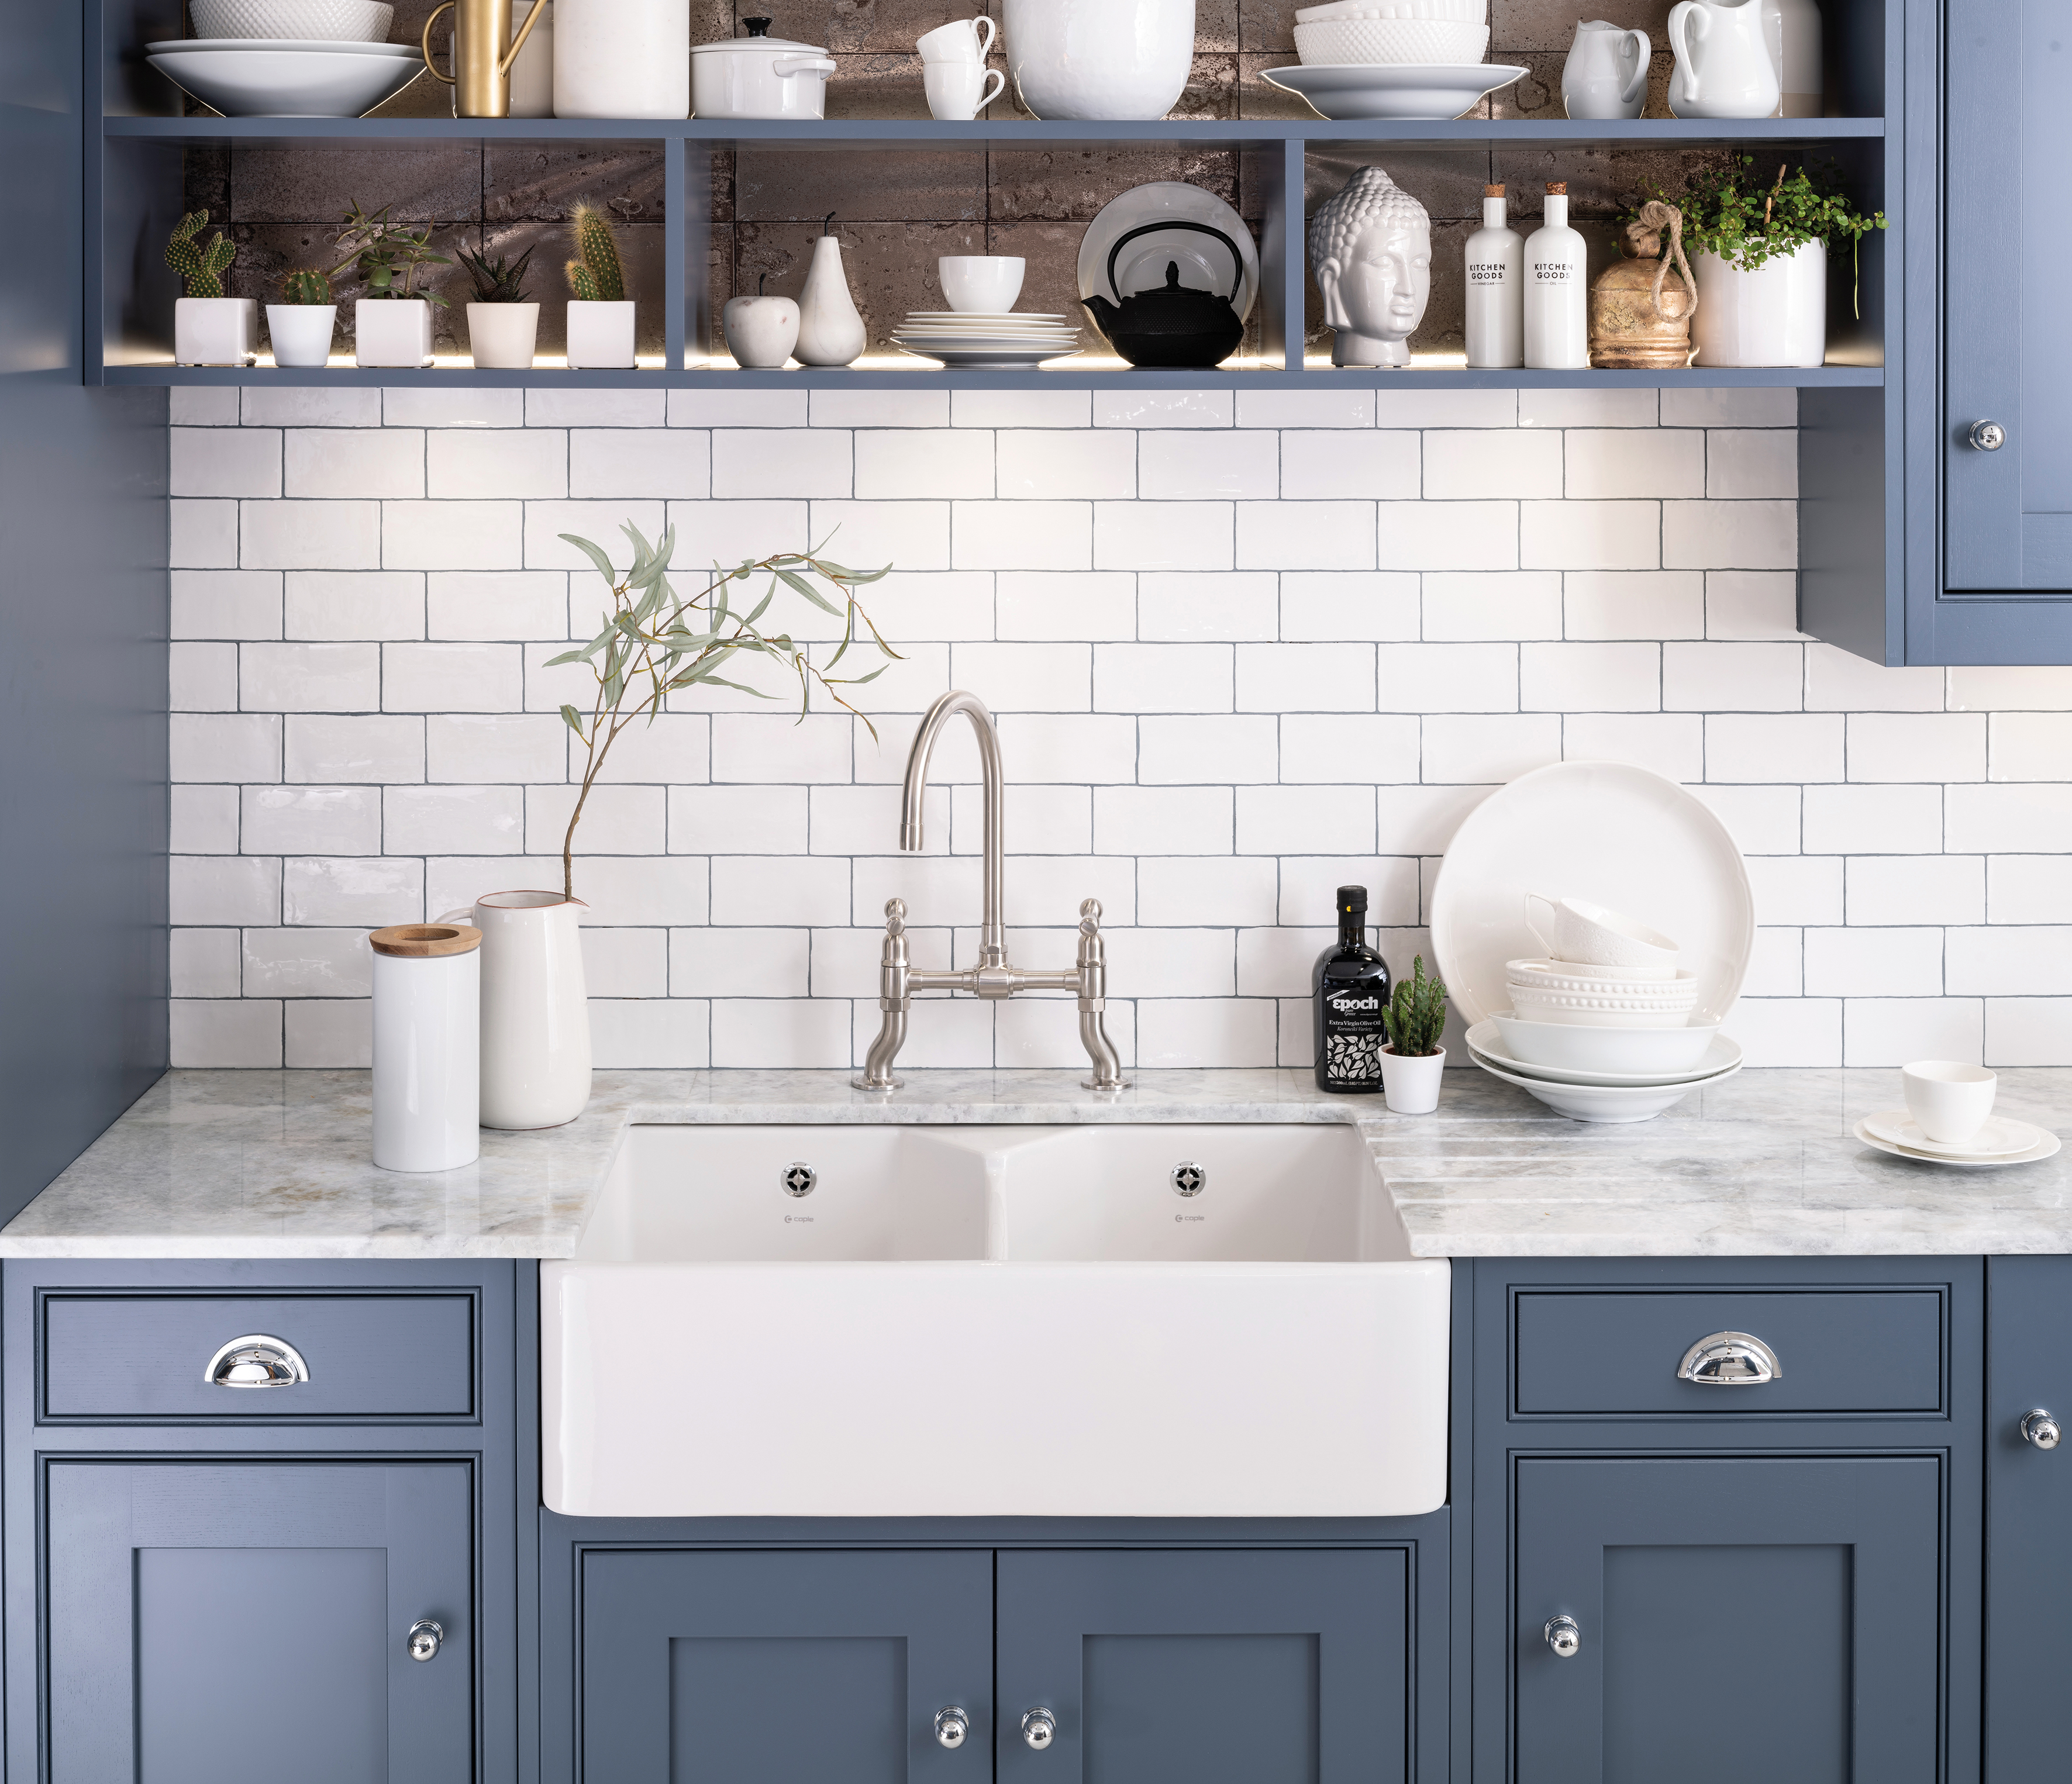 Caple's stainless steel Putney Bridge tap, from around £330 (shown here with a Chepstow sink in a Harptree kitchen), features a classic dual flow bridge design and ceramic valves (Caple/PA)